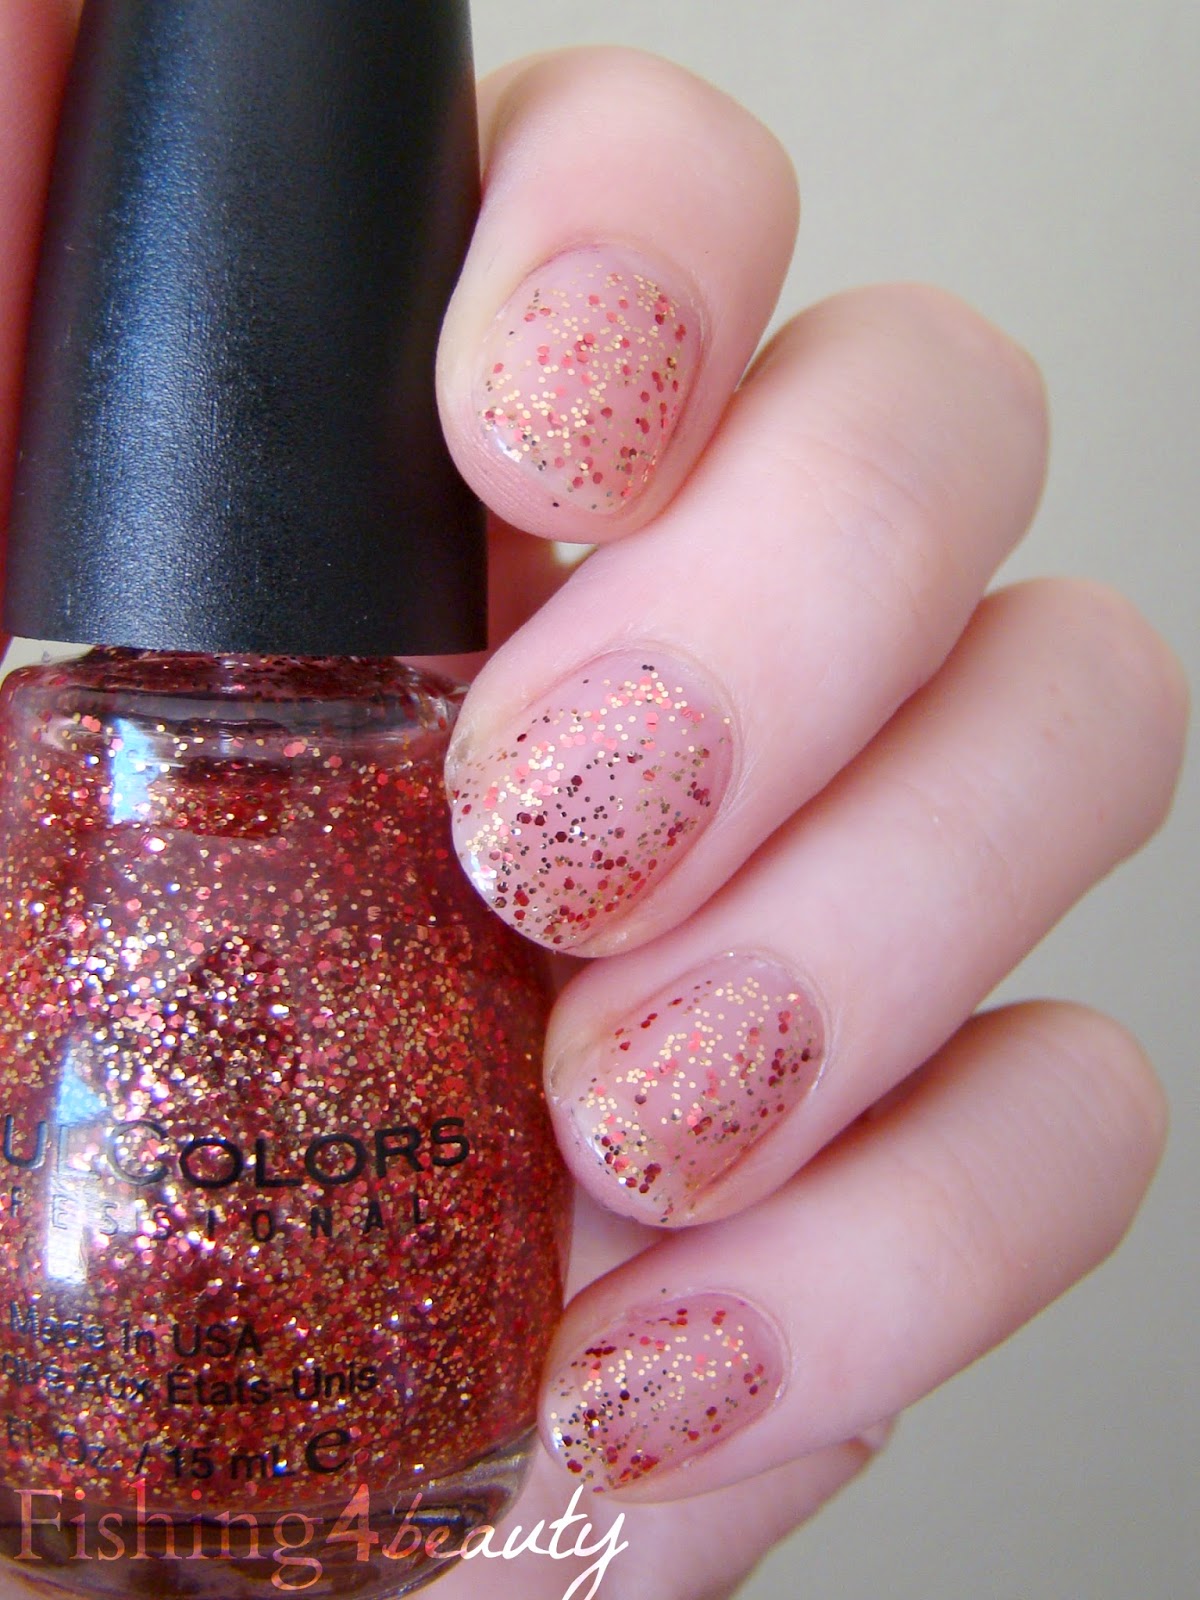 Fishing4Beauty: SinfulColors Halloween 2014 Wicked Color Collection